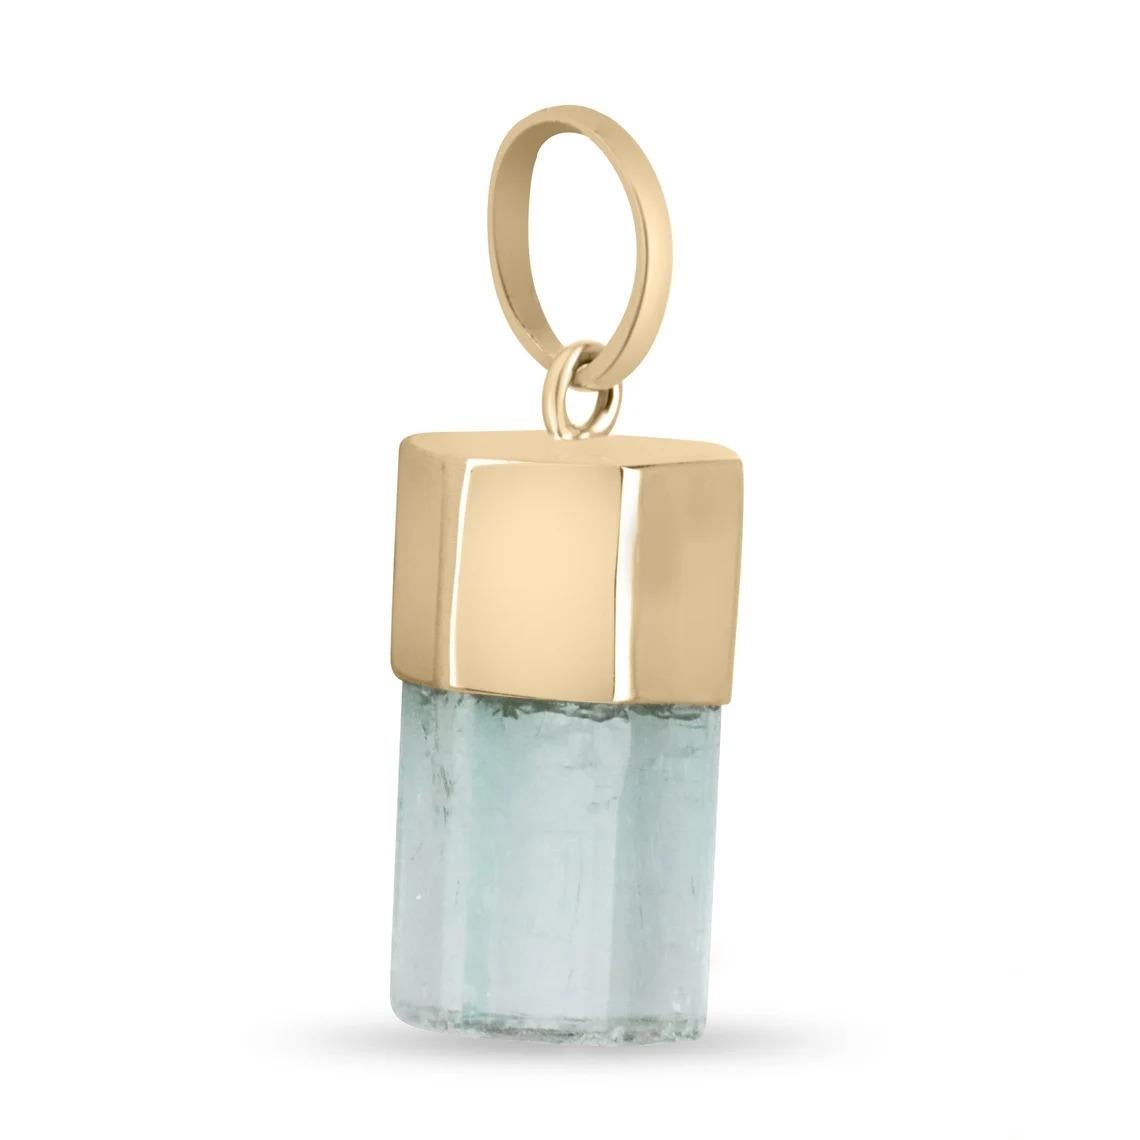 Showcased is a rare, single terminated natural Columbian emerald crystal gold pendant 14K. A genuine, Colombian emerald crystal is perfectly capped by smooth yellow gold. The piece has very good transparency and termination which is rare to have for